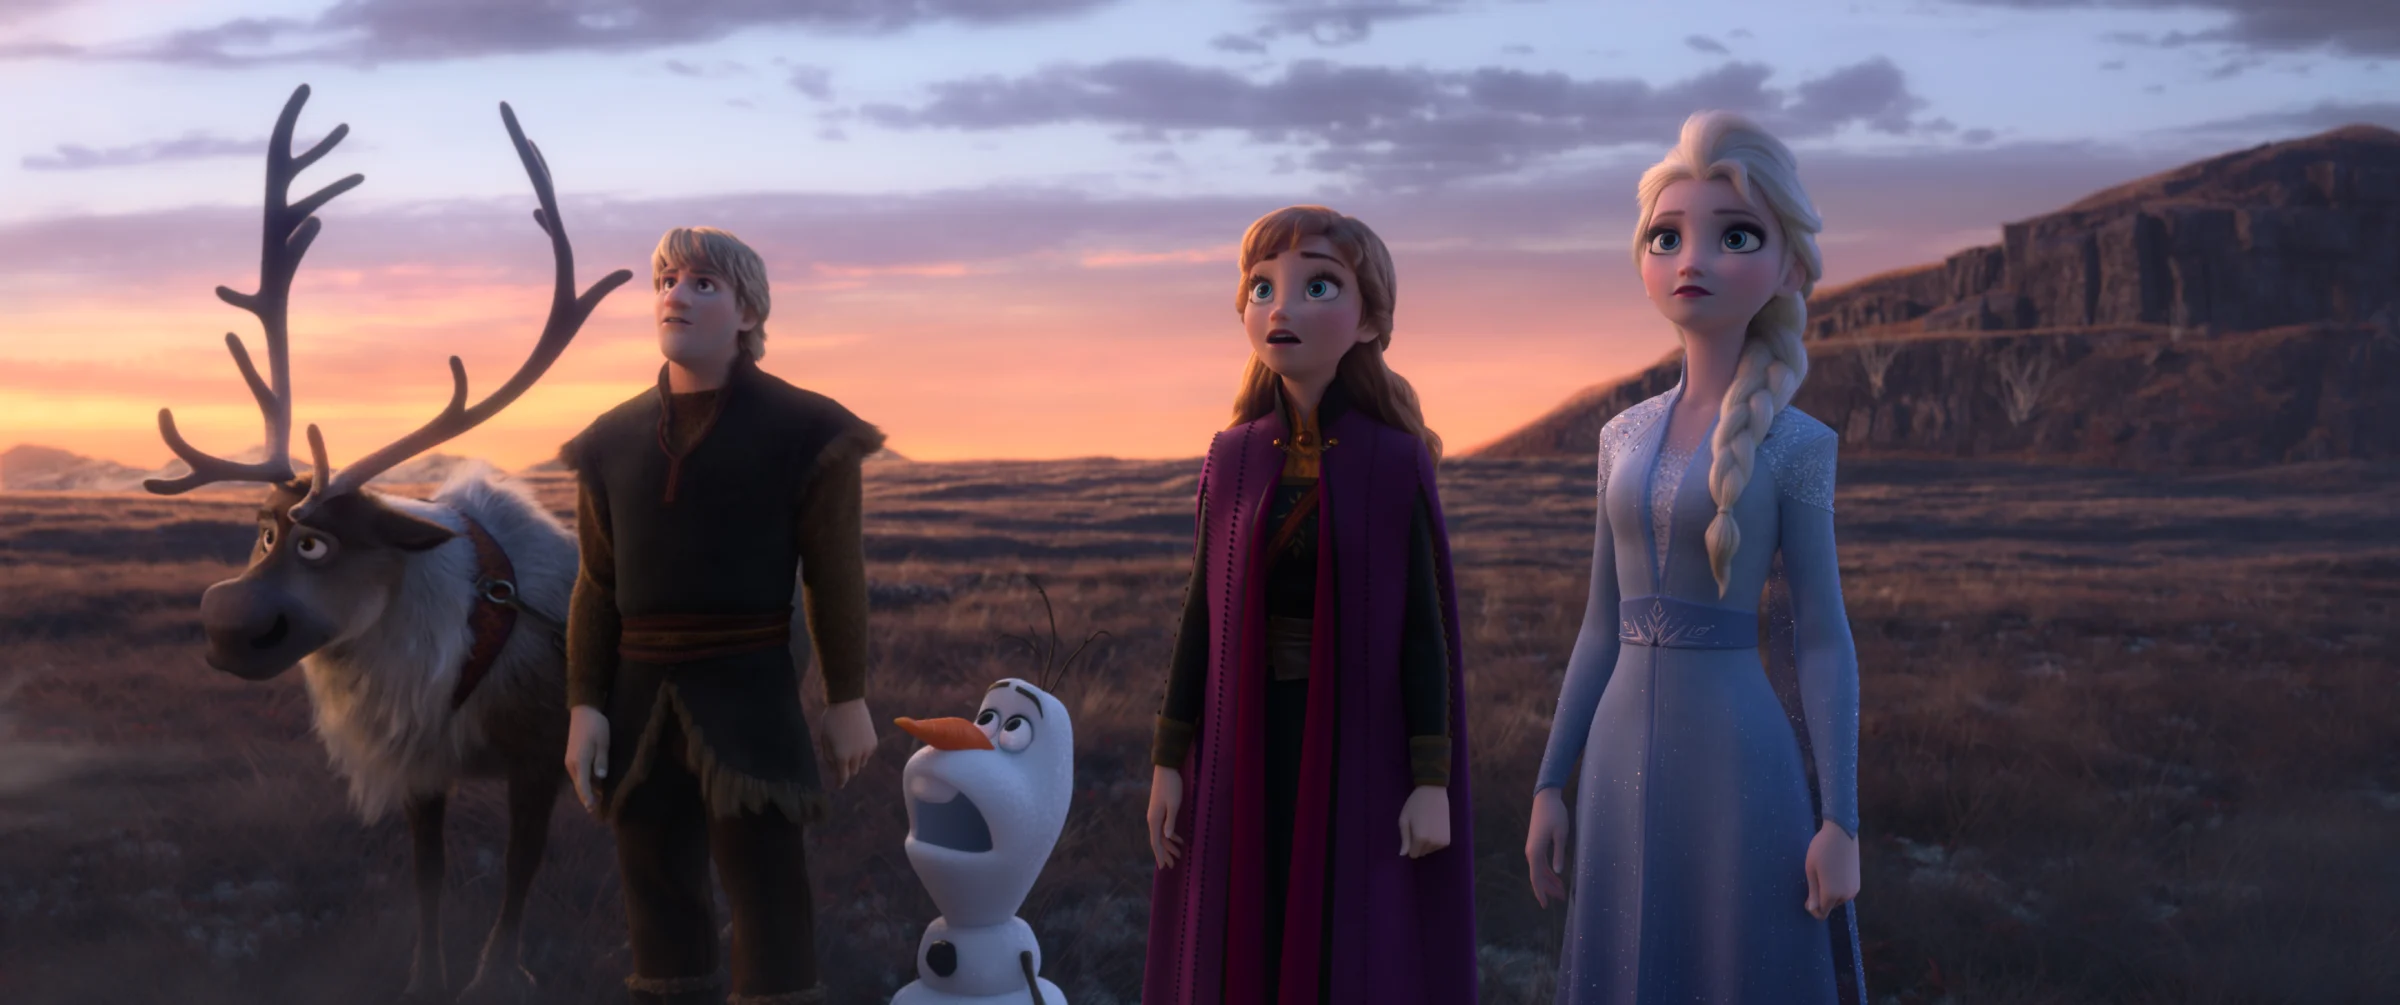 The Release Date For 'Frozen 3' Has Just Been Announced